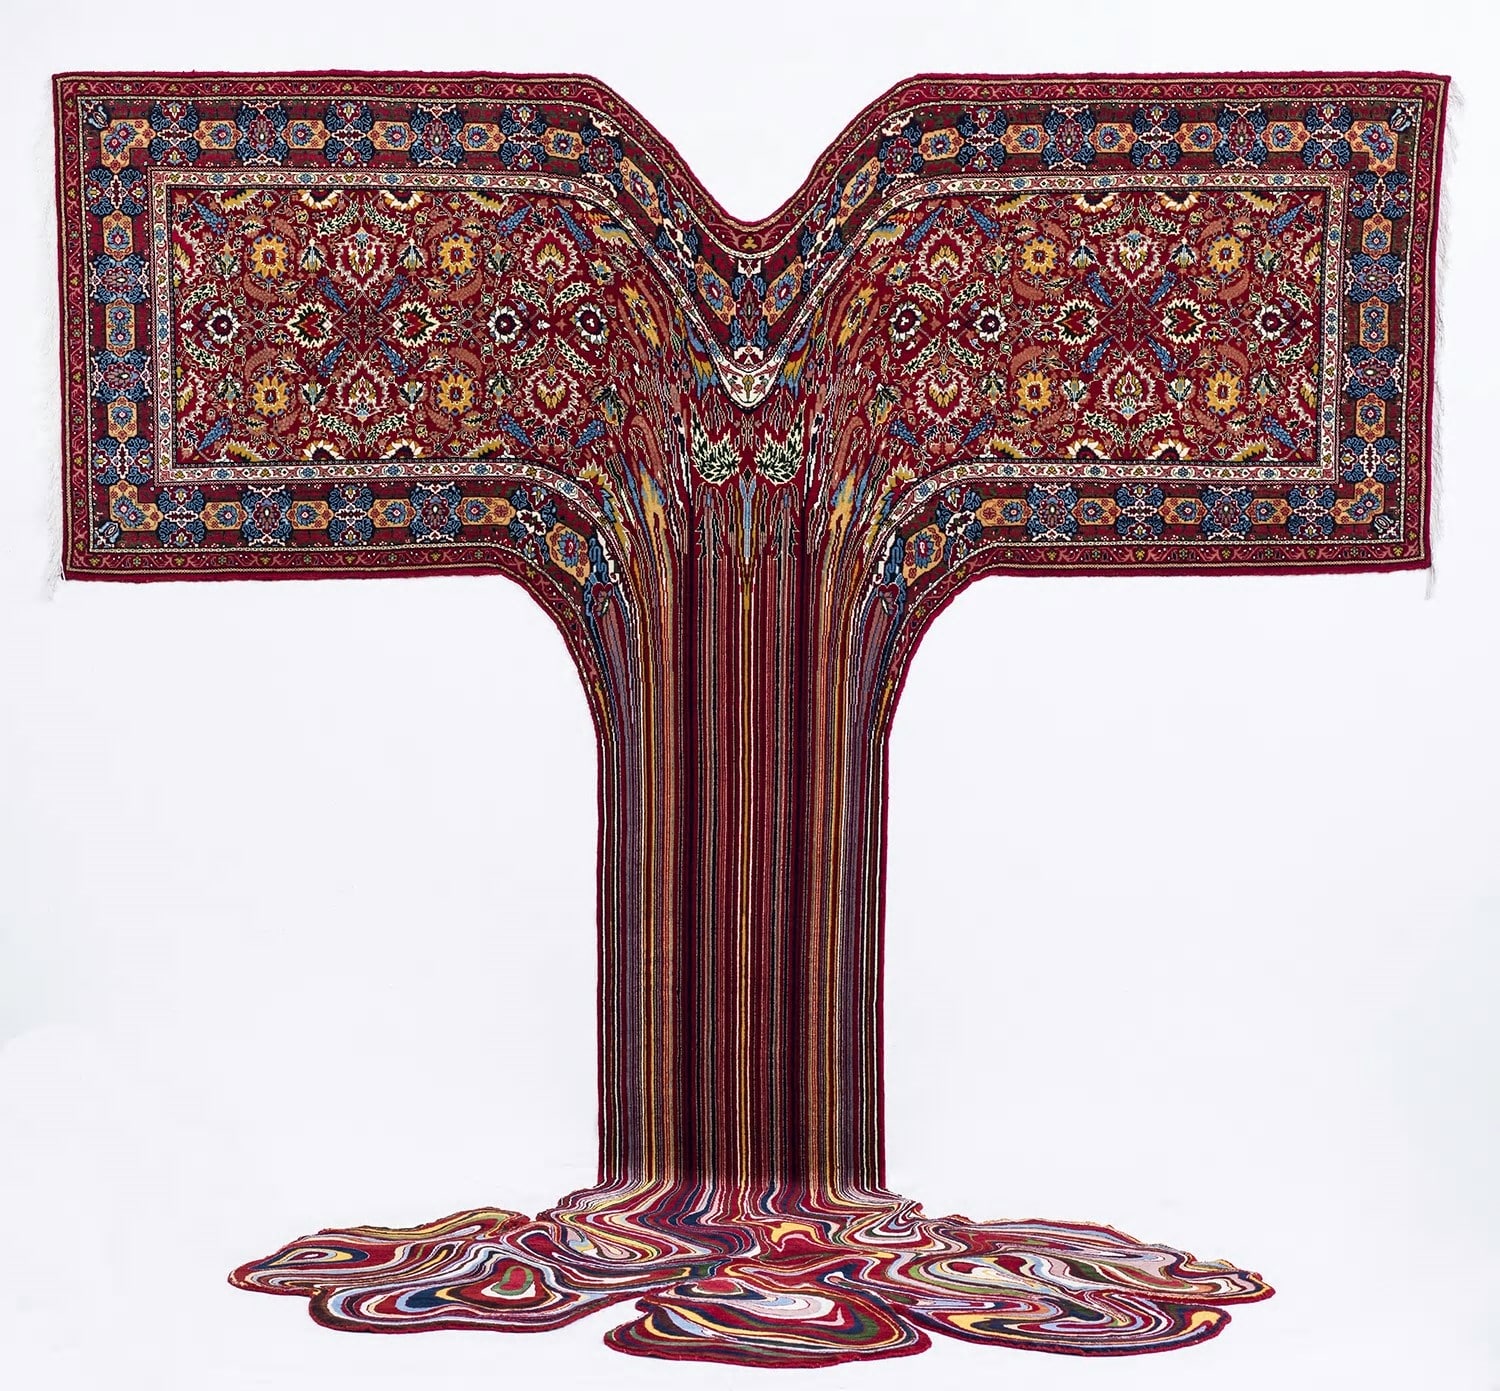 a wall-mounted oriental carpet that pools in threads on the floor